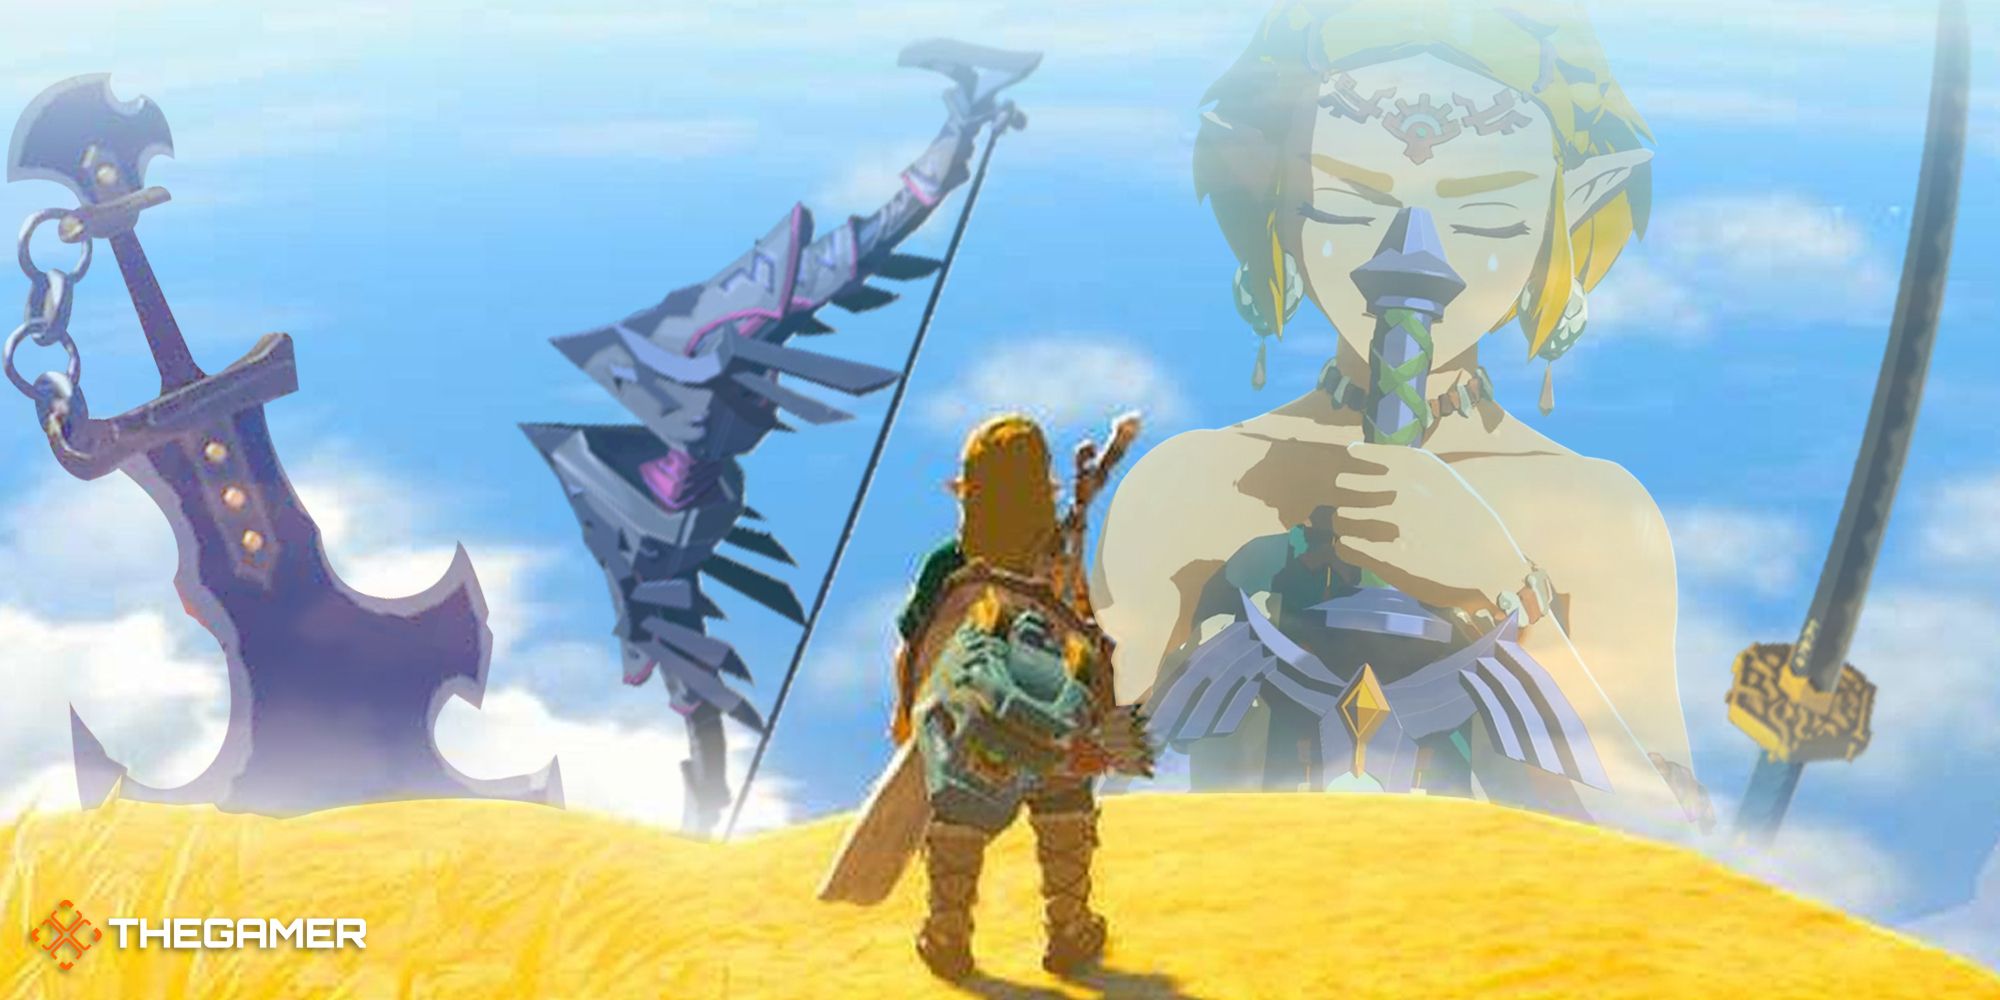 Link stares out at Zelda, The Master Sword, a Royal Guard's Bow, and more floating in the sky in The Legend Of Zelda: Tears Of The Kingdom.